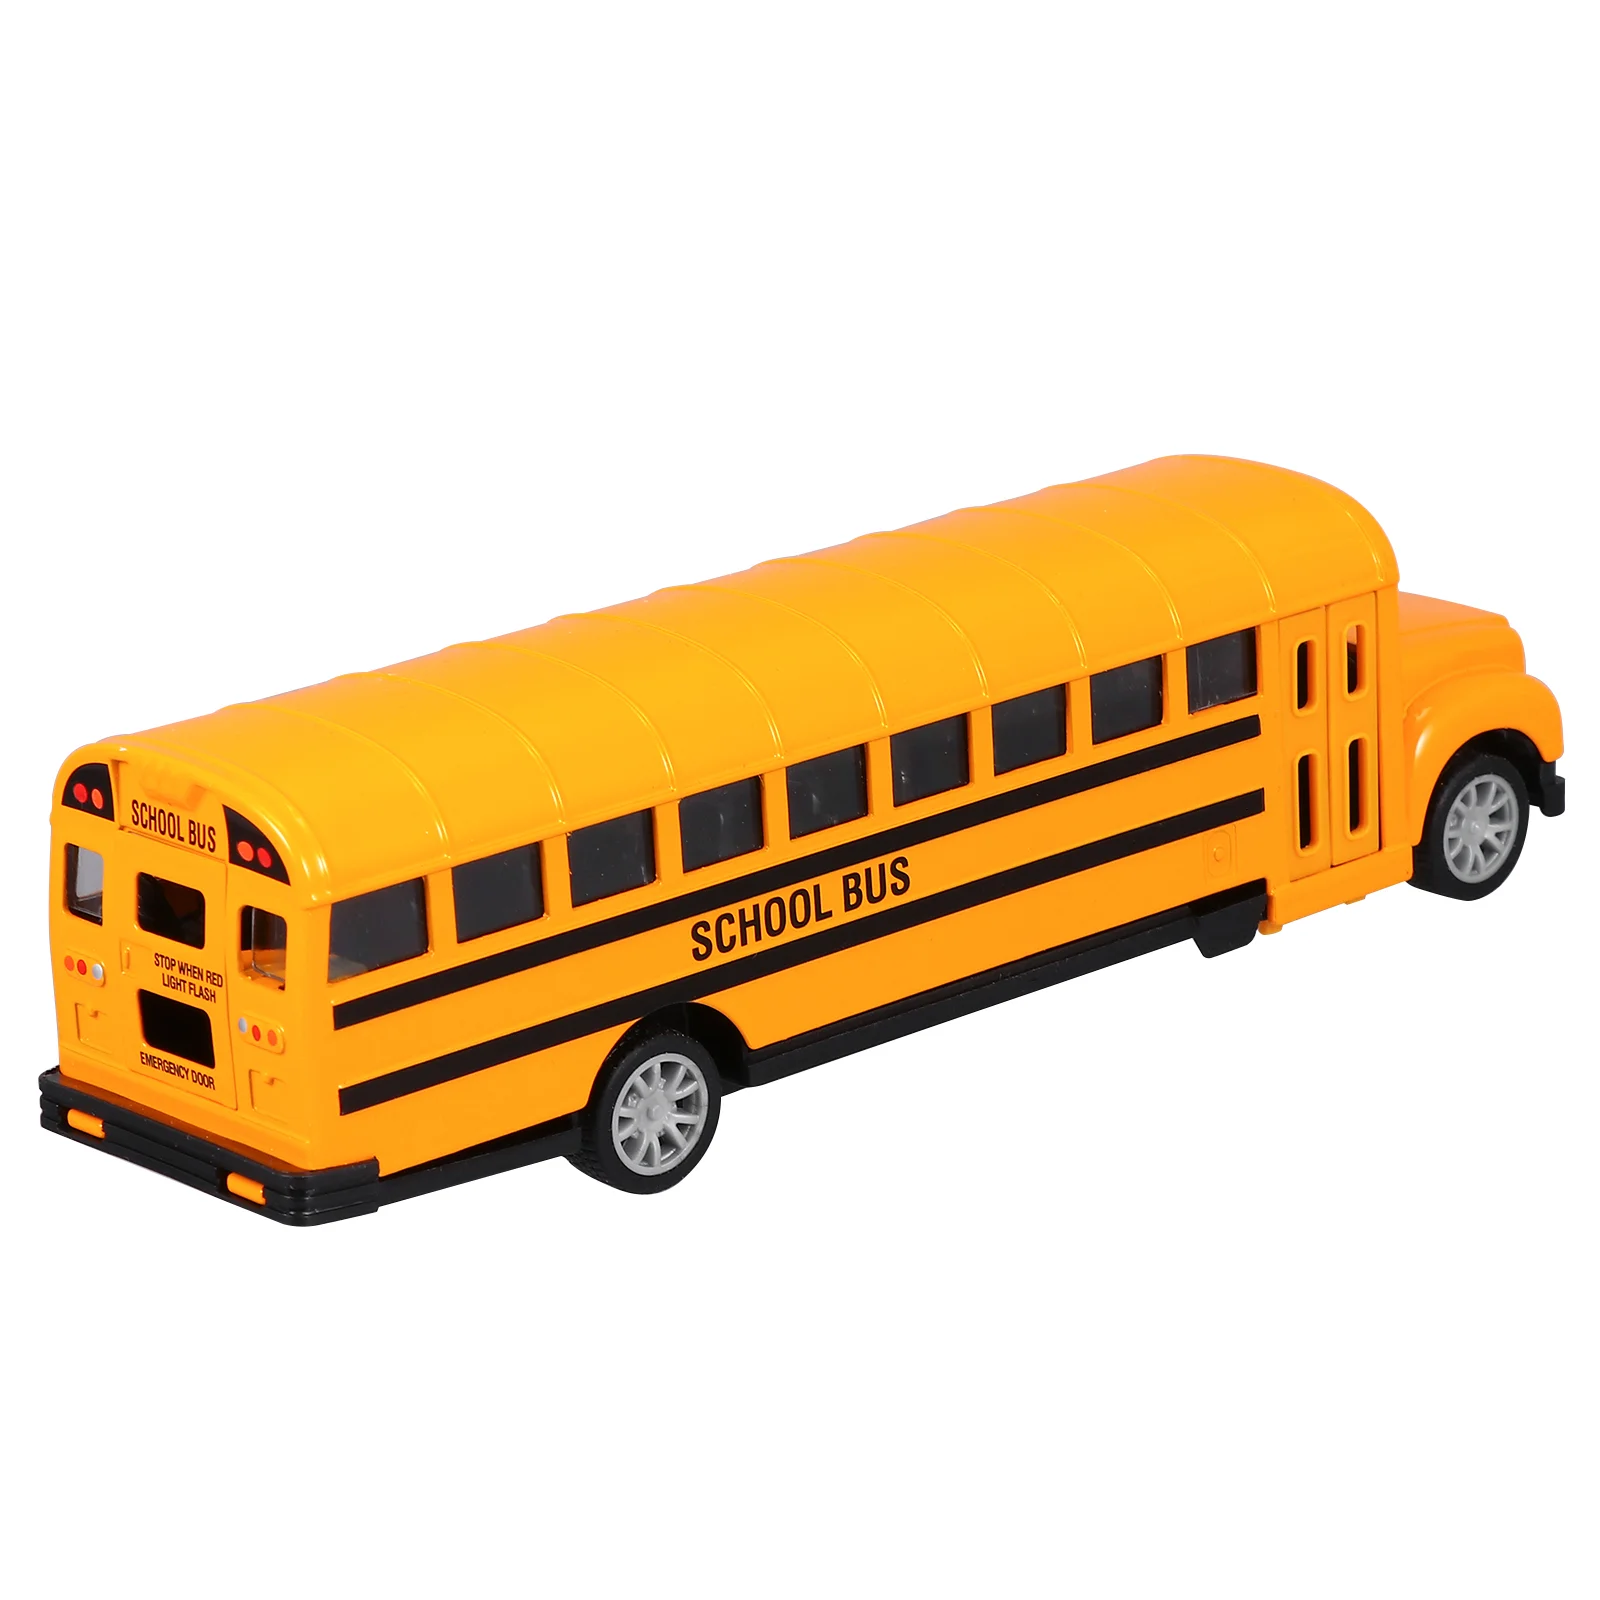 School Bus Model, Die Cast Back Vehicles Cars 8. 46In Educational Gift for Kids images - 6